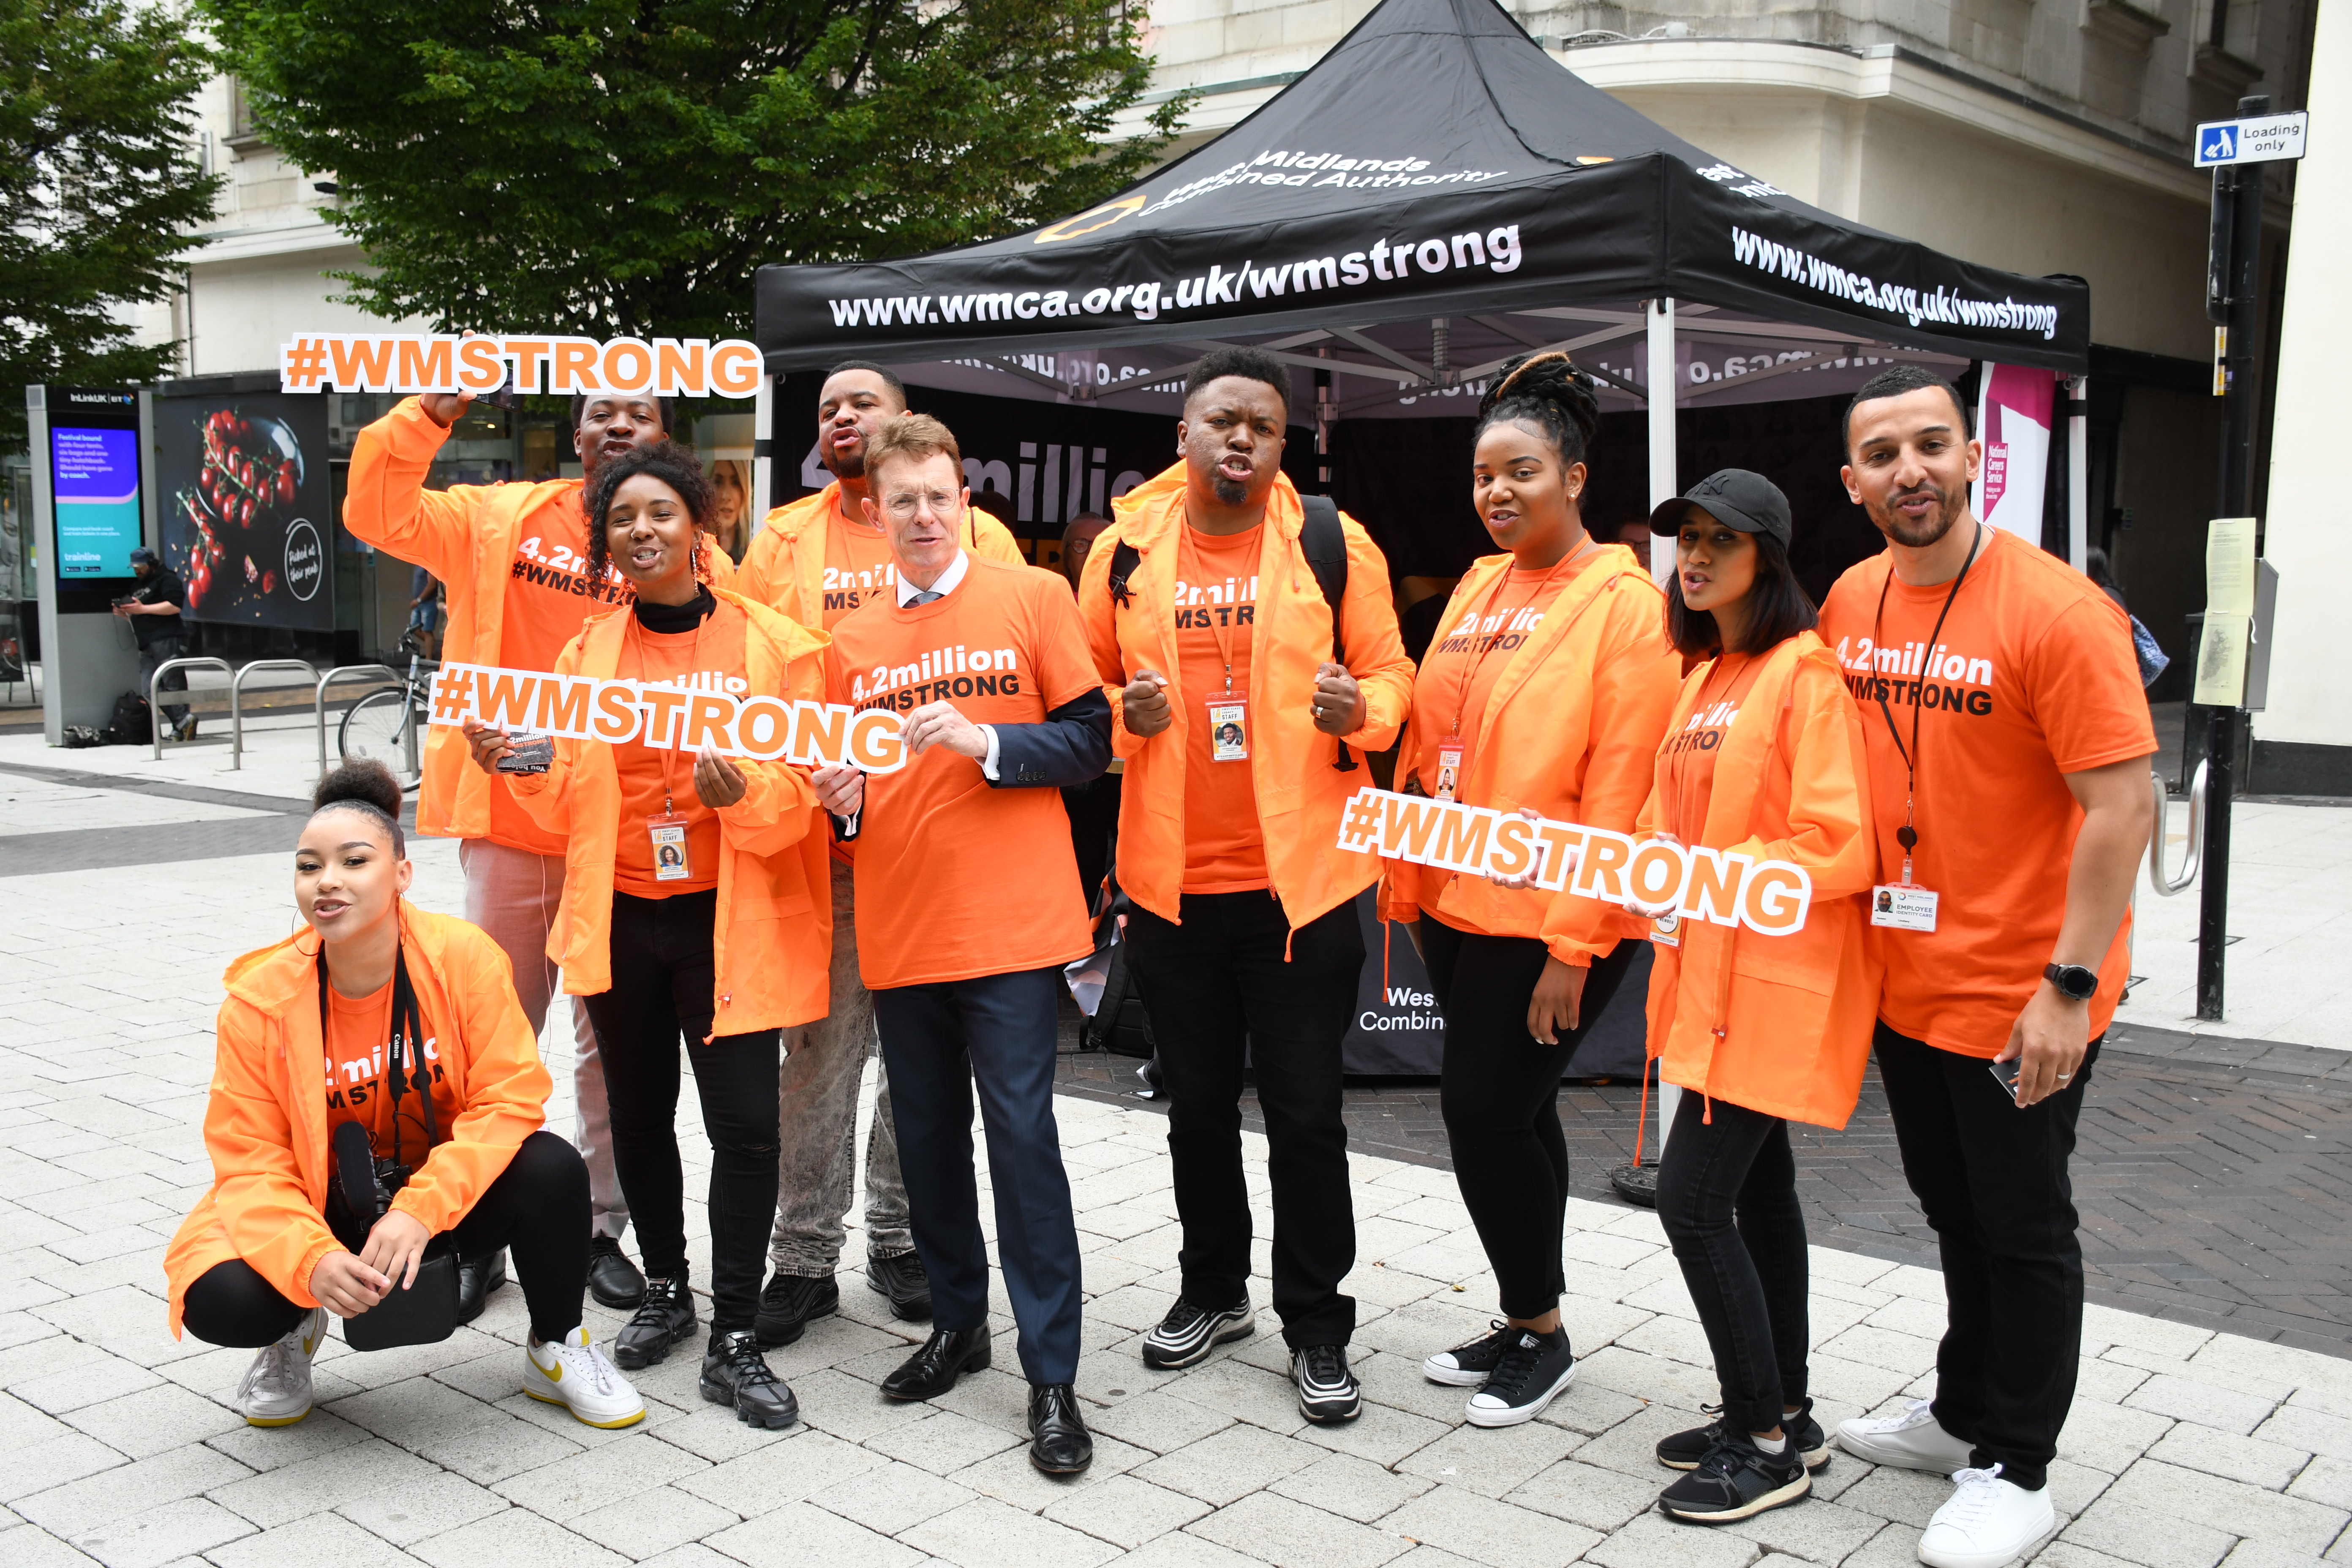 Staff from First Class Legacy and WMCA at the campaign event in Birmingham High Street